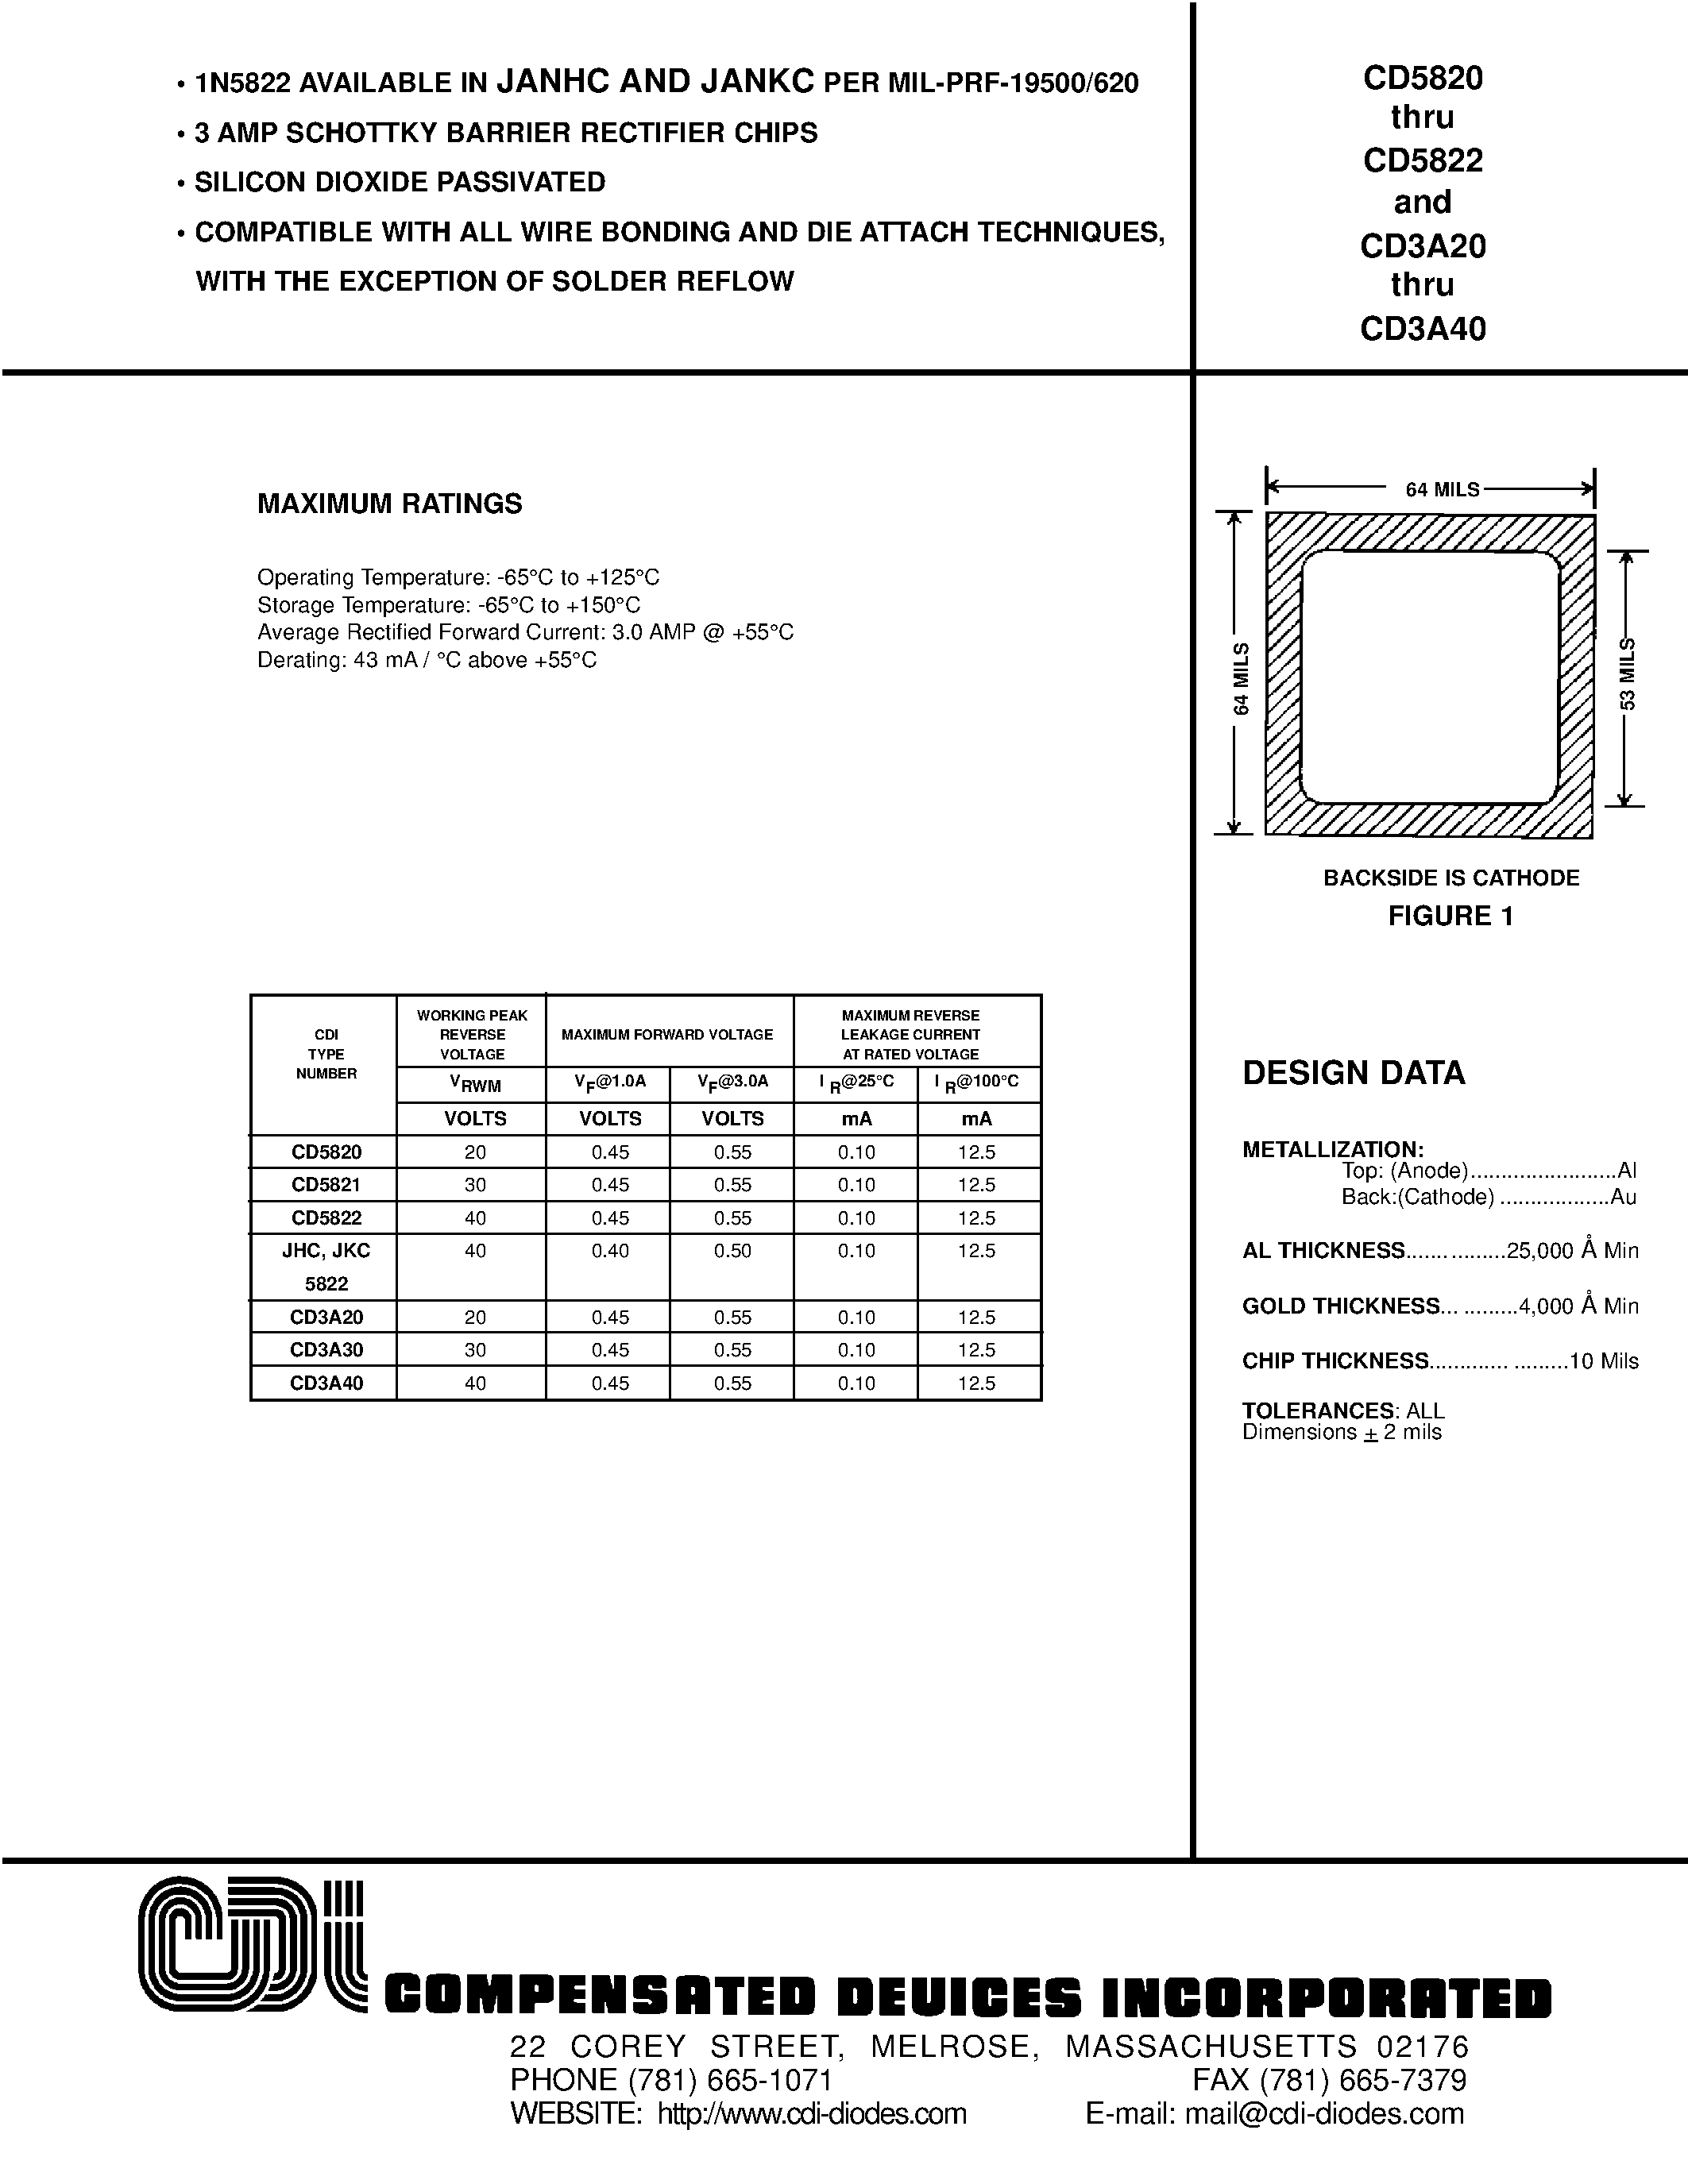 Datasheet CD3A30 - SILICON DIOXIDE PASSIVATED page 1